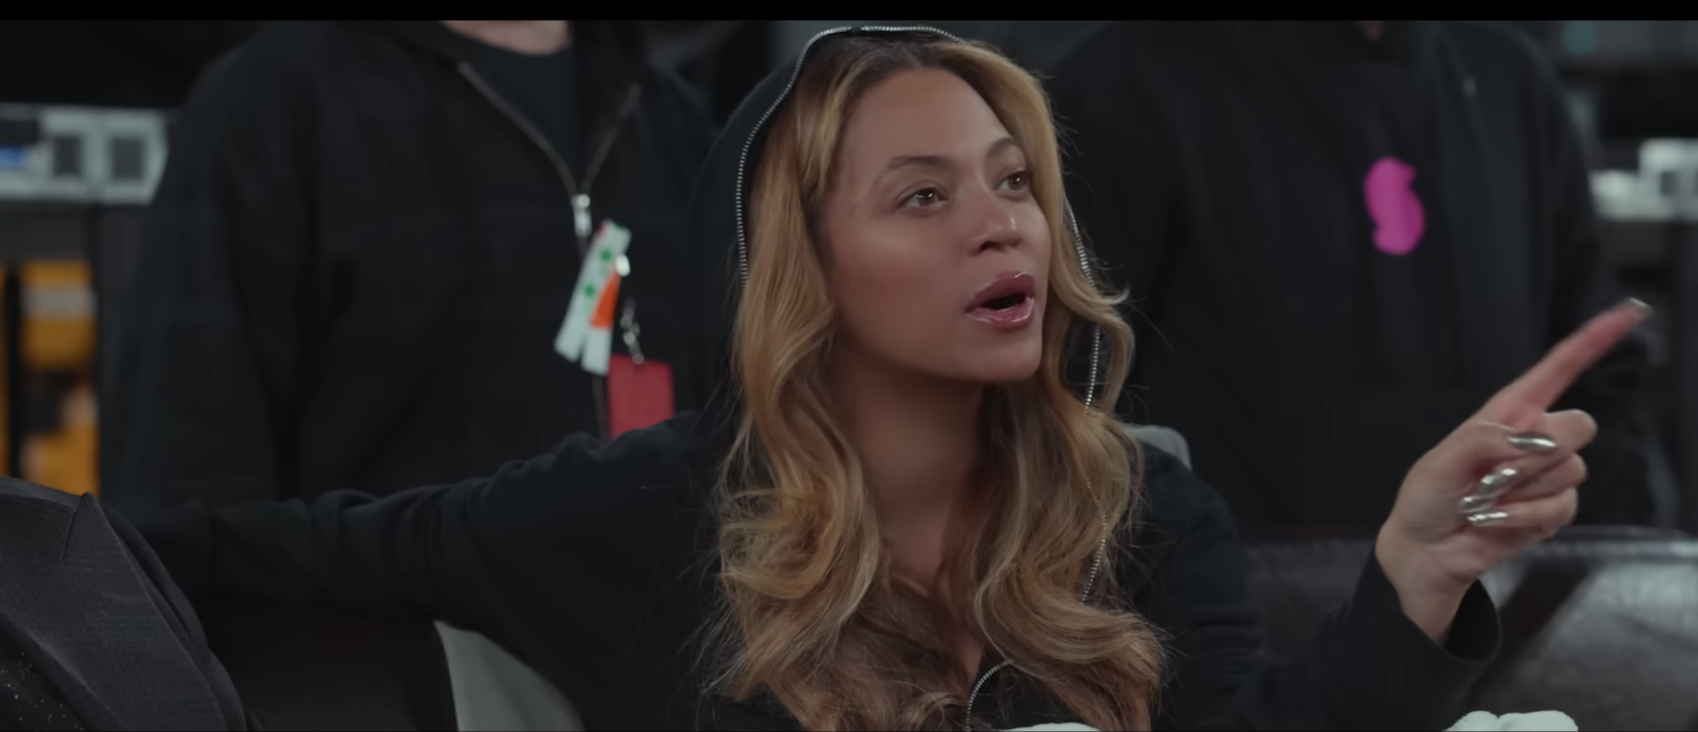 Beyoncé pointing as she speaks with her crew